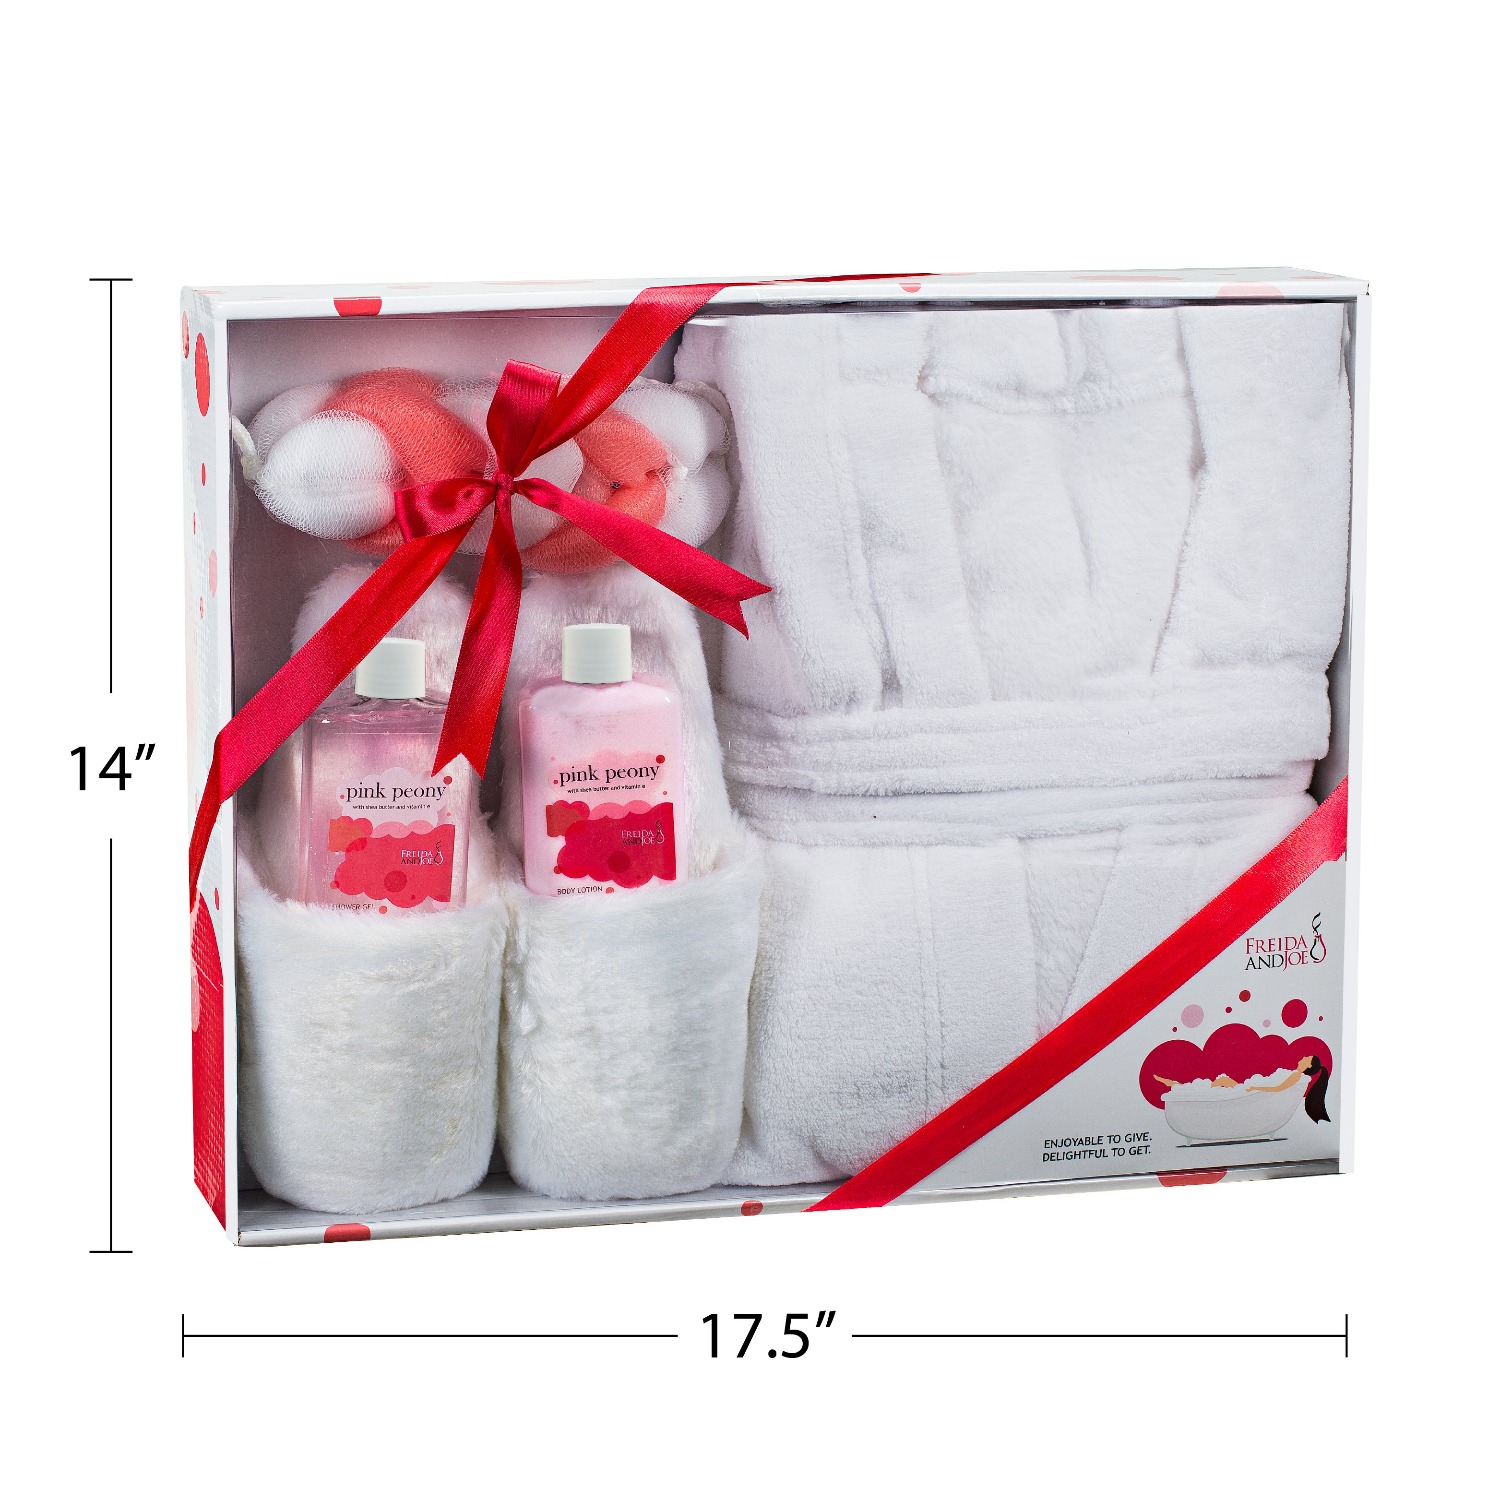 Freida & Joe Gift for Her Pink Peony Scent Home Spa Gift Basket with Luxury Bathrobe & Slipper for Women - image 2 of 5